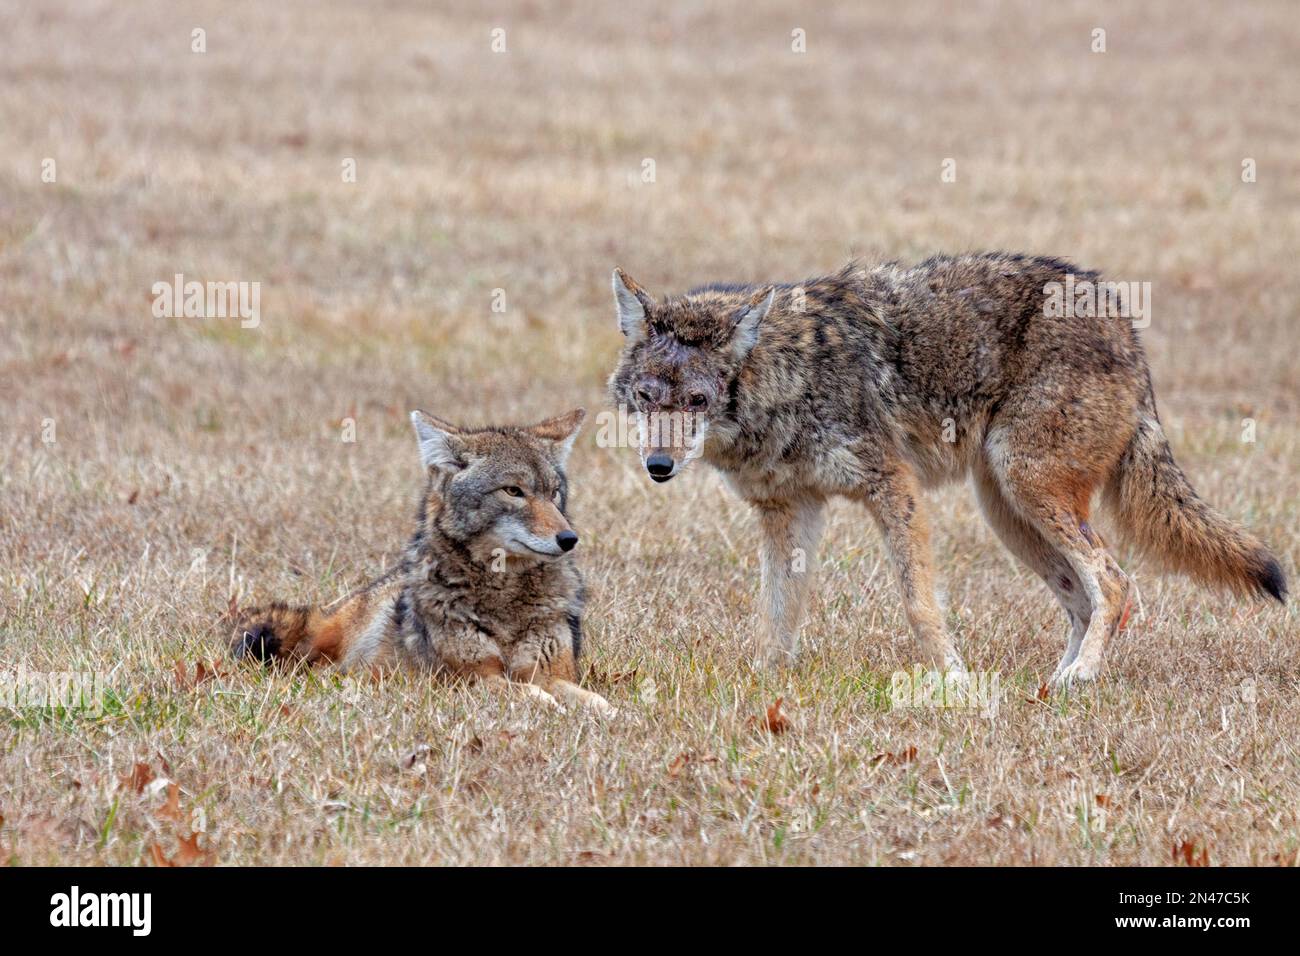 A coyote stands guard over another coyote that is laying on the grass. Both coyotes look into the camera. Stock Photo